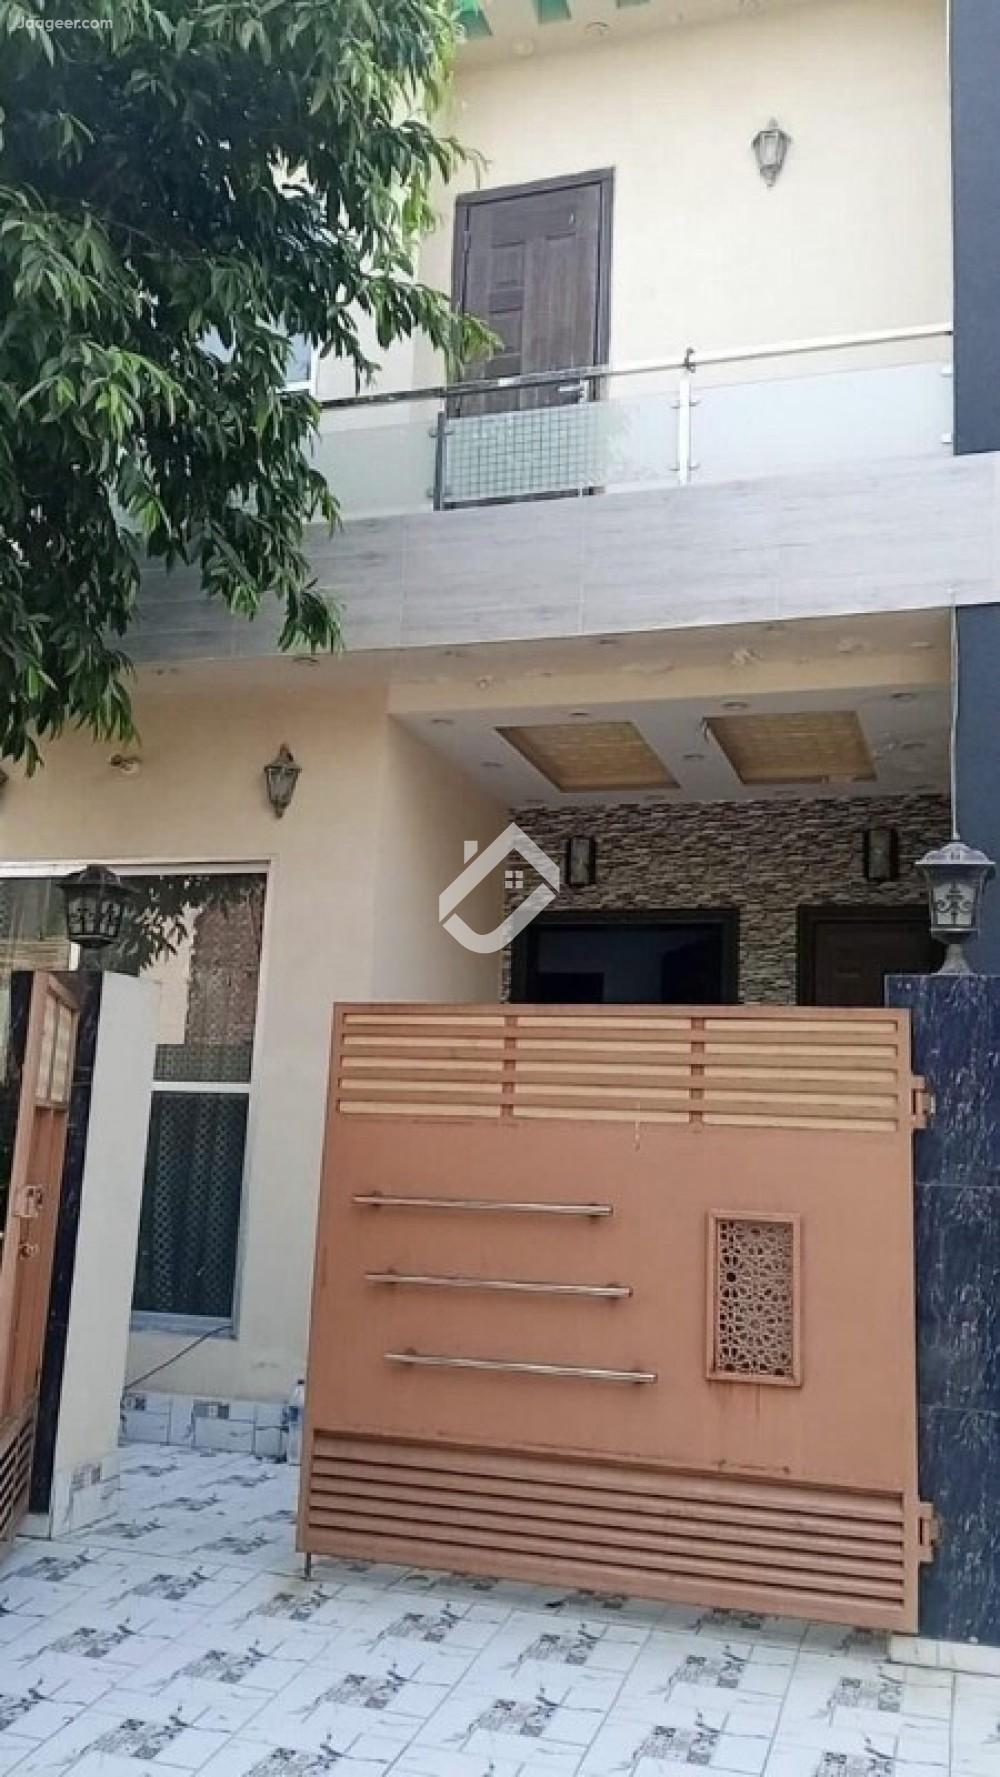 Main image 3 Marla Double Storey House For Sale In New Lahore City --